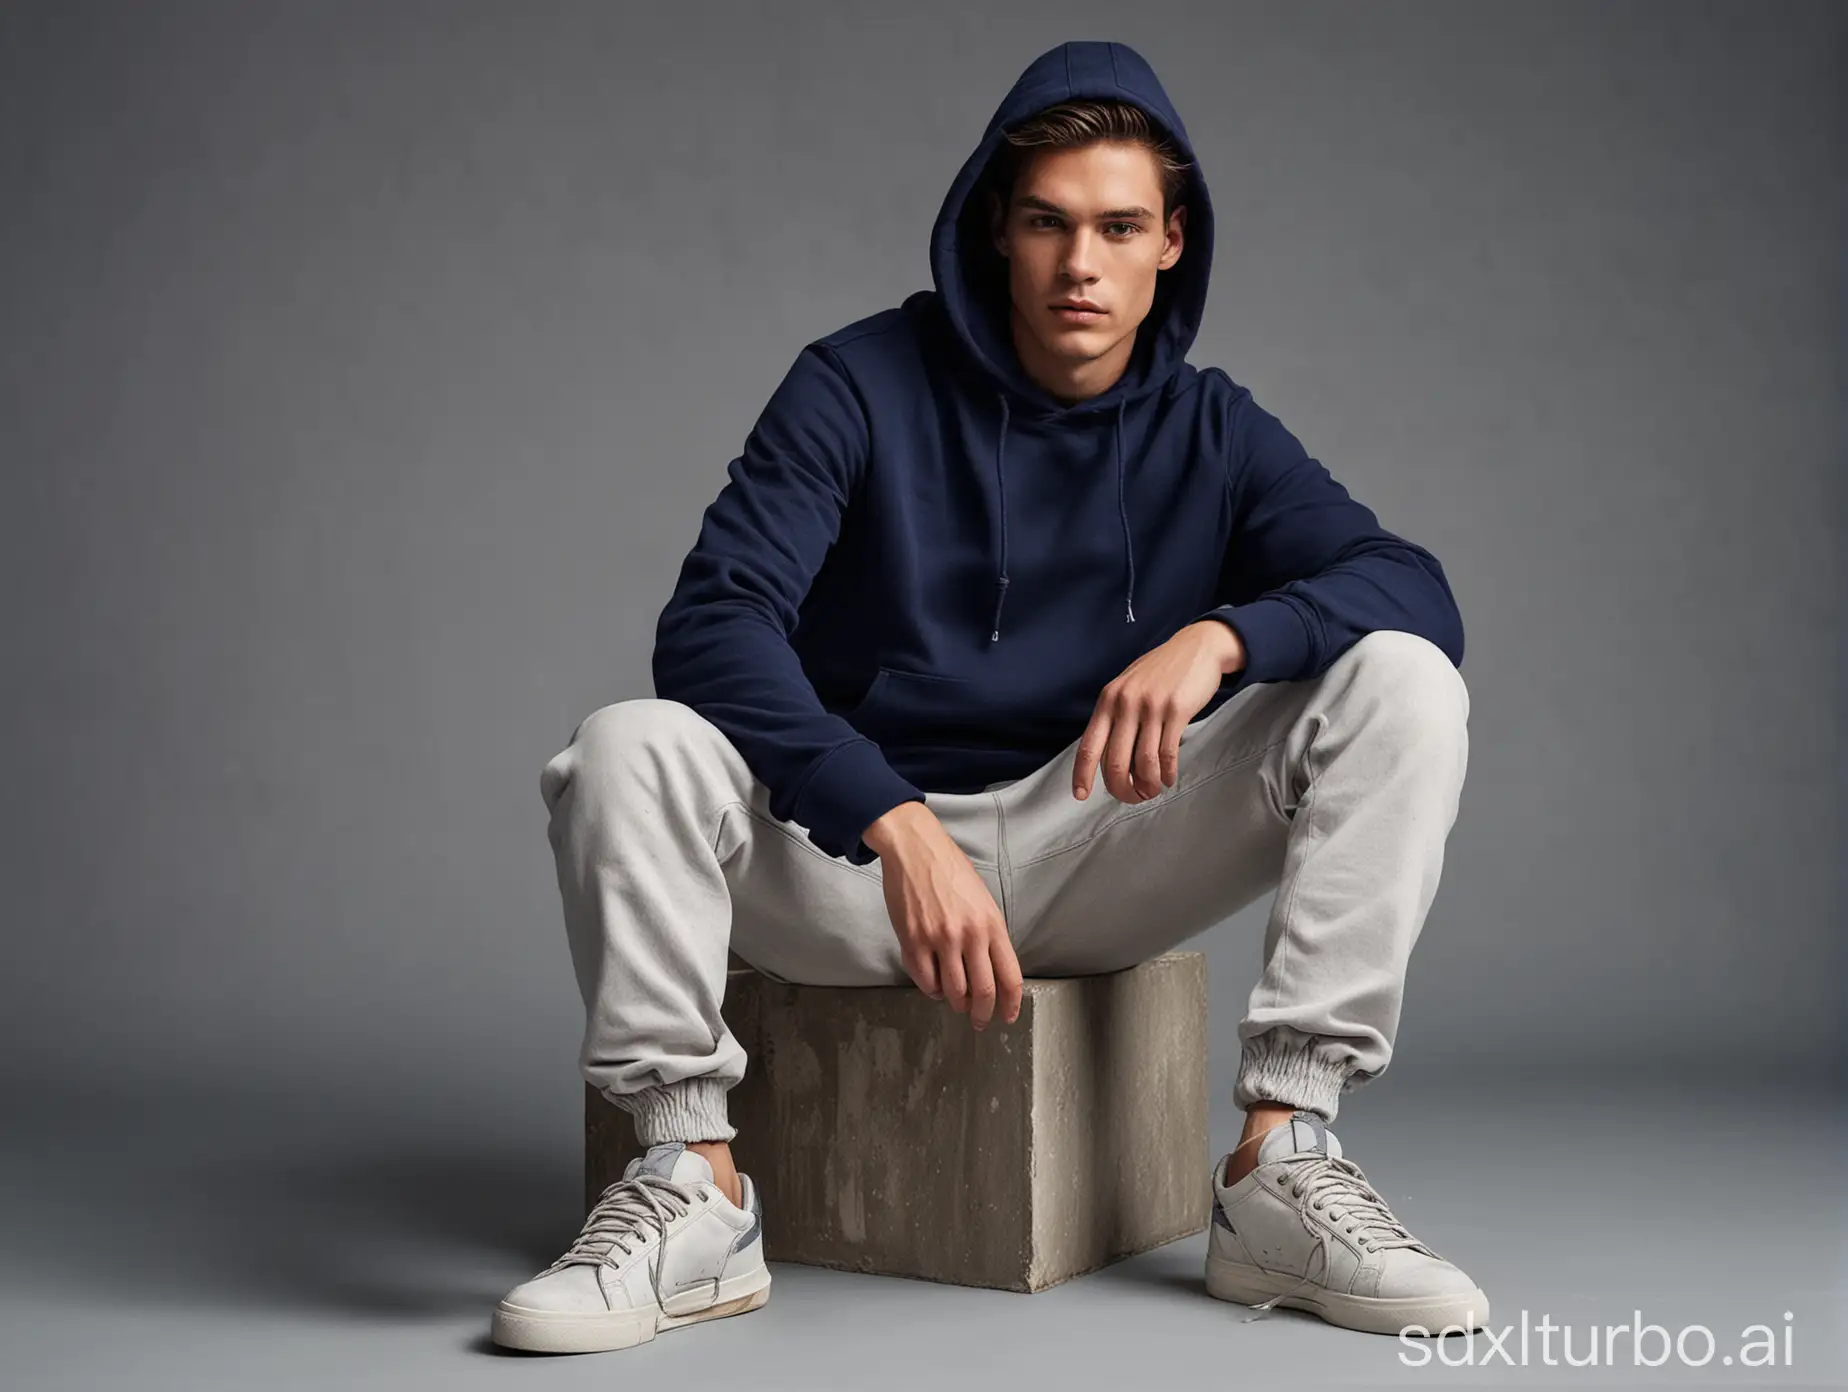 Create an image of a male model seated in a trendy pose, wearing a loose-fit  navy blue color hoodie, light grey color pant, and sneakers, against a studio background with textured elements.